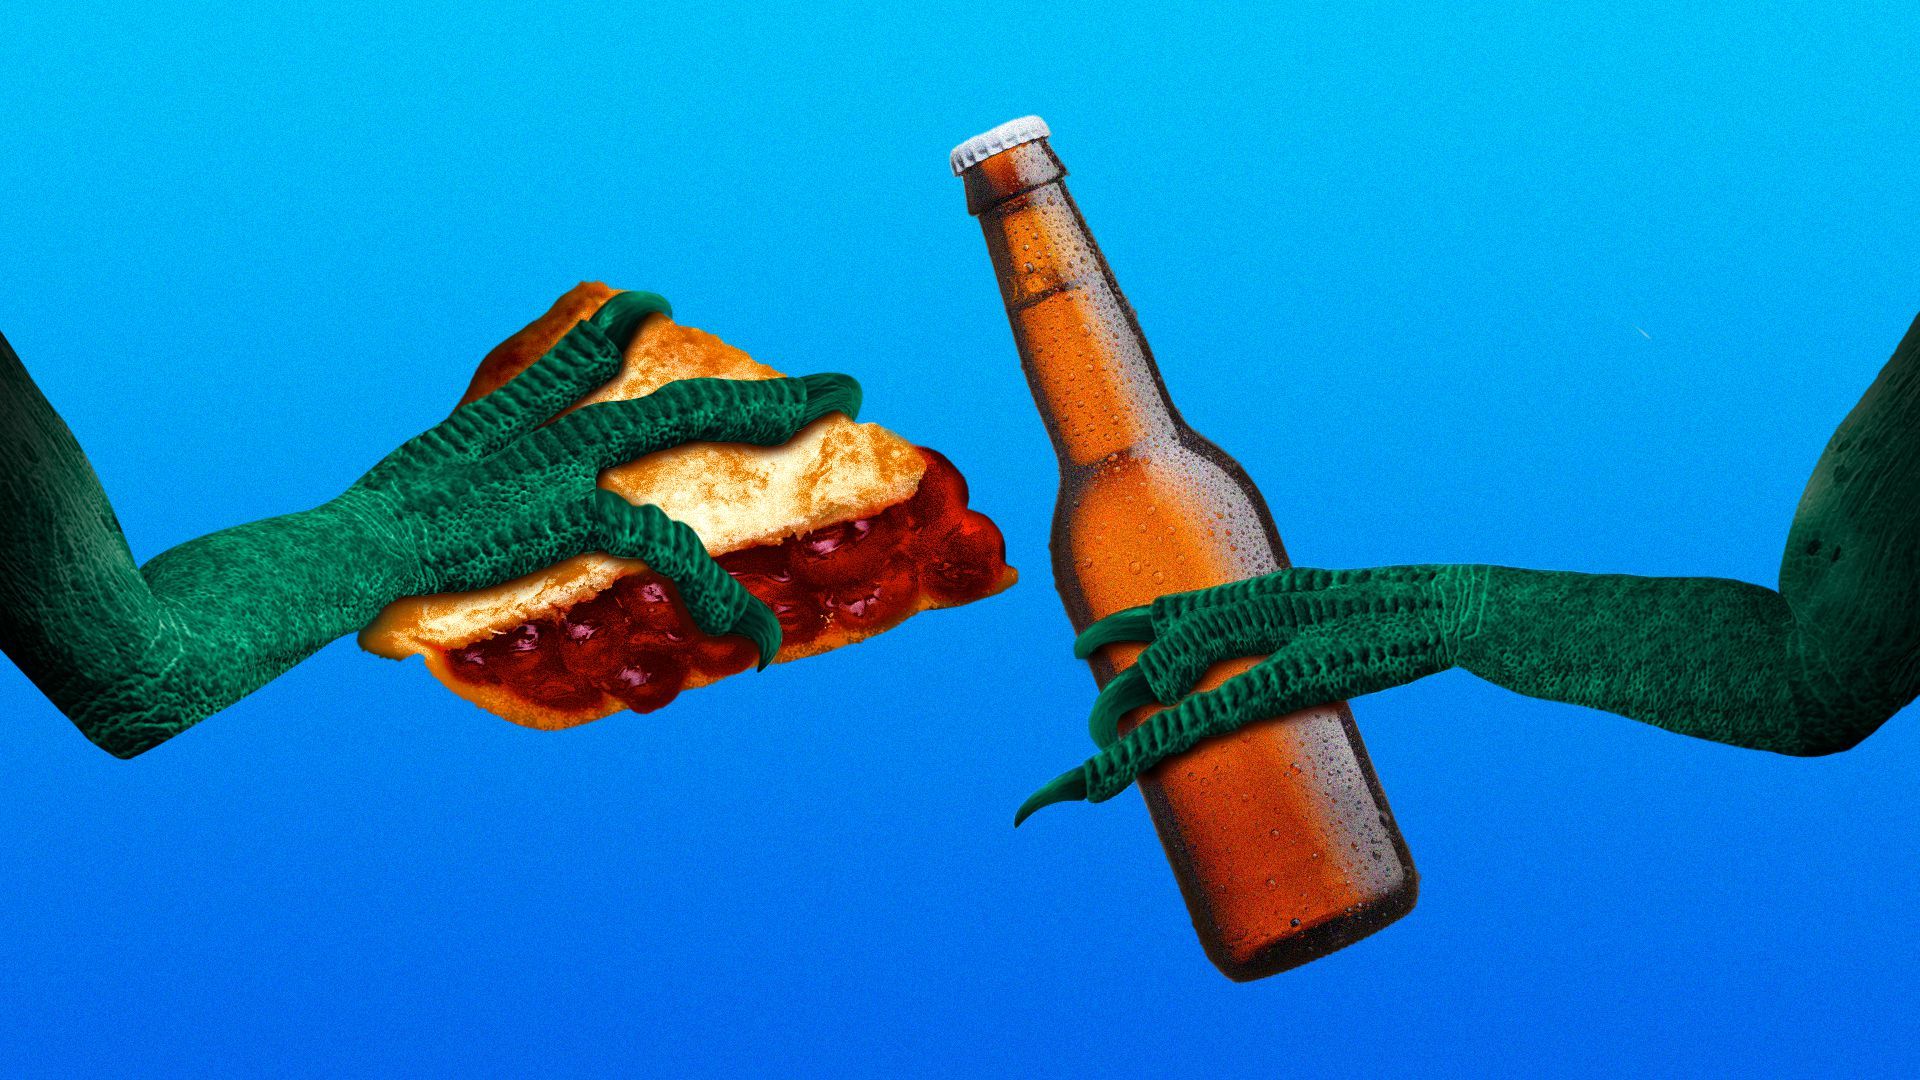 Illustration of dinosaur claws holding a piece of pie and a bottle of beer.